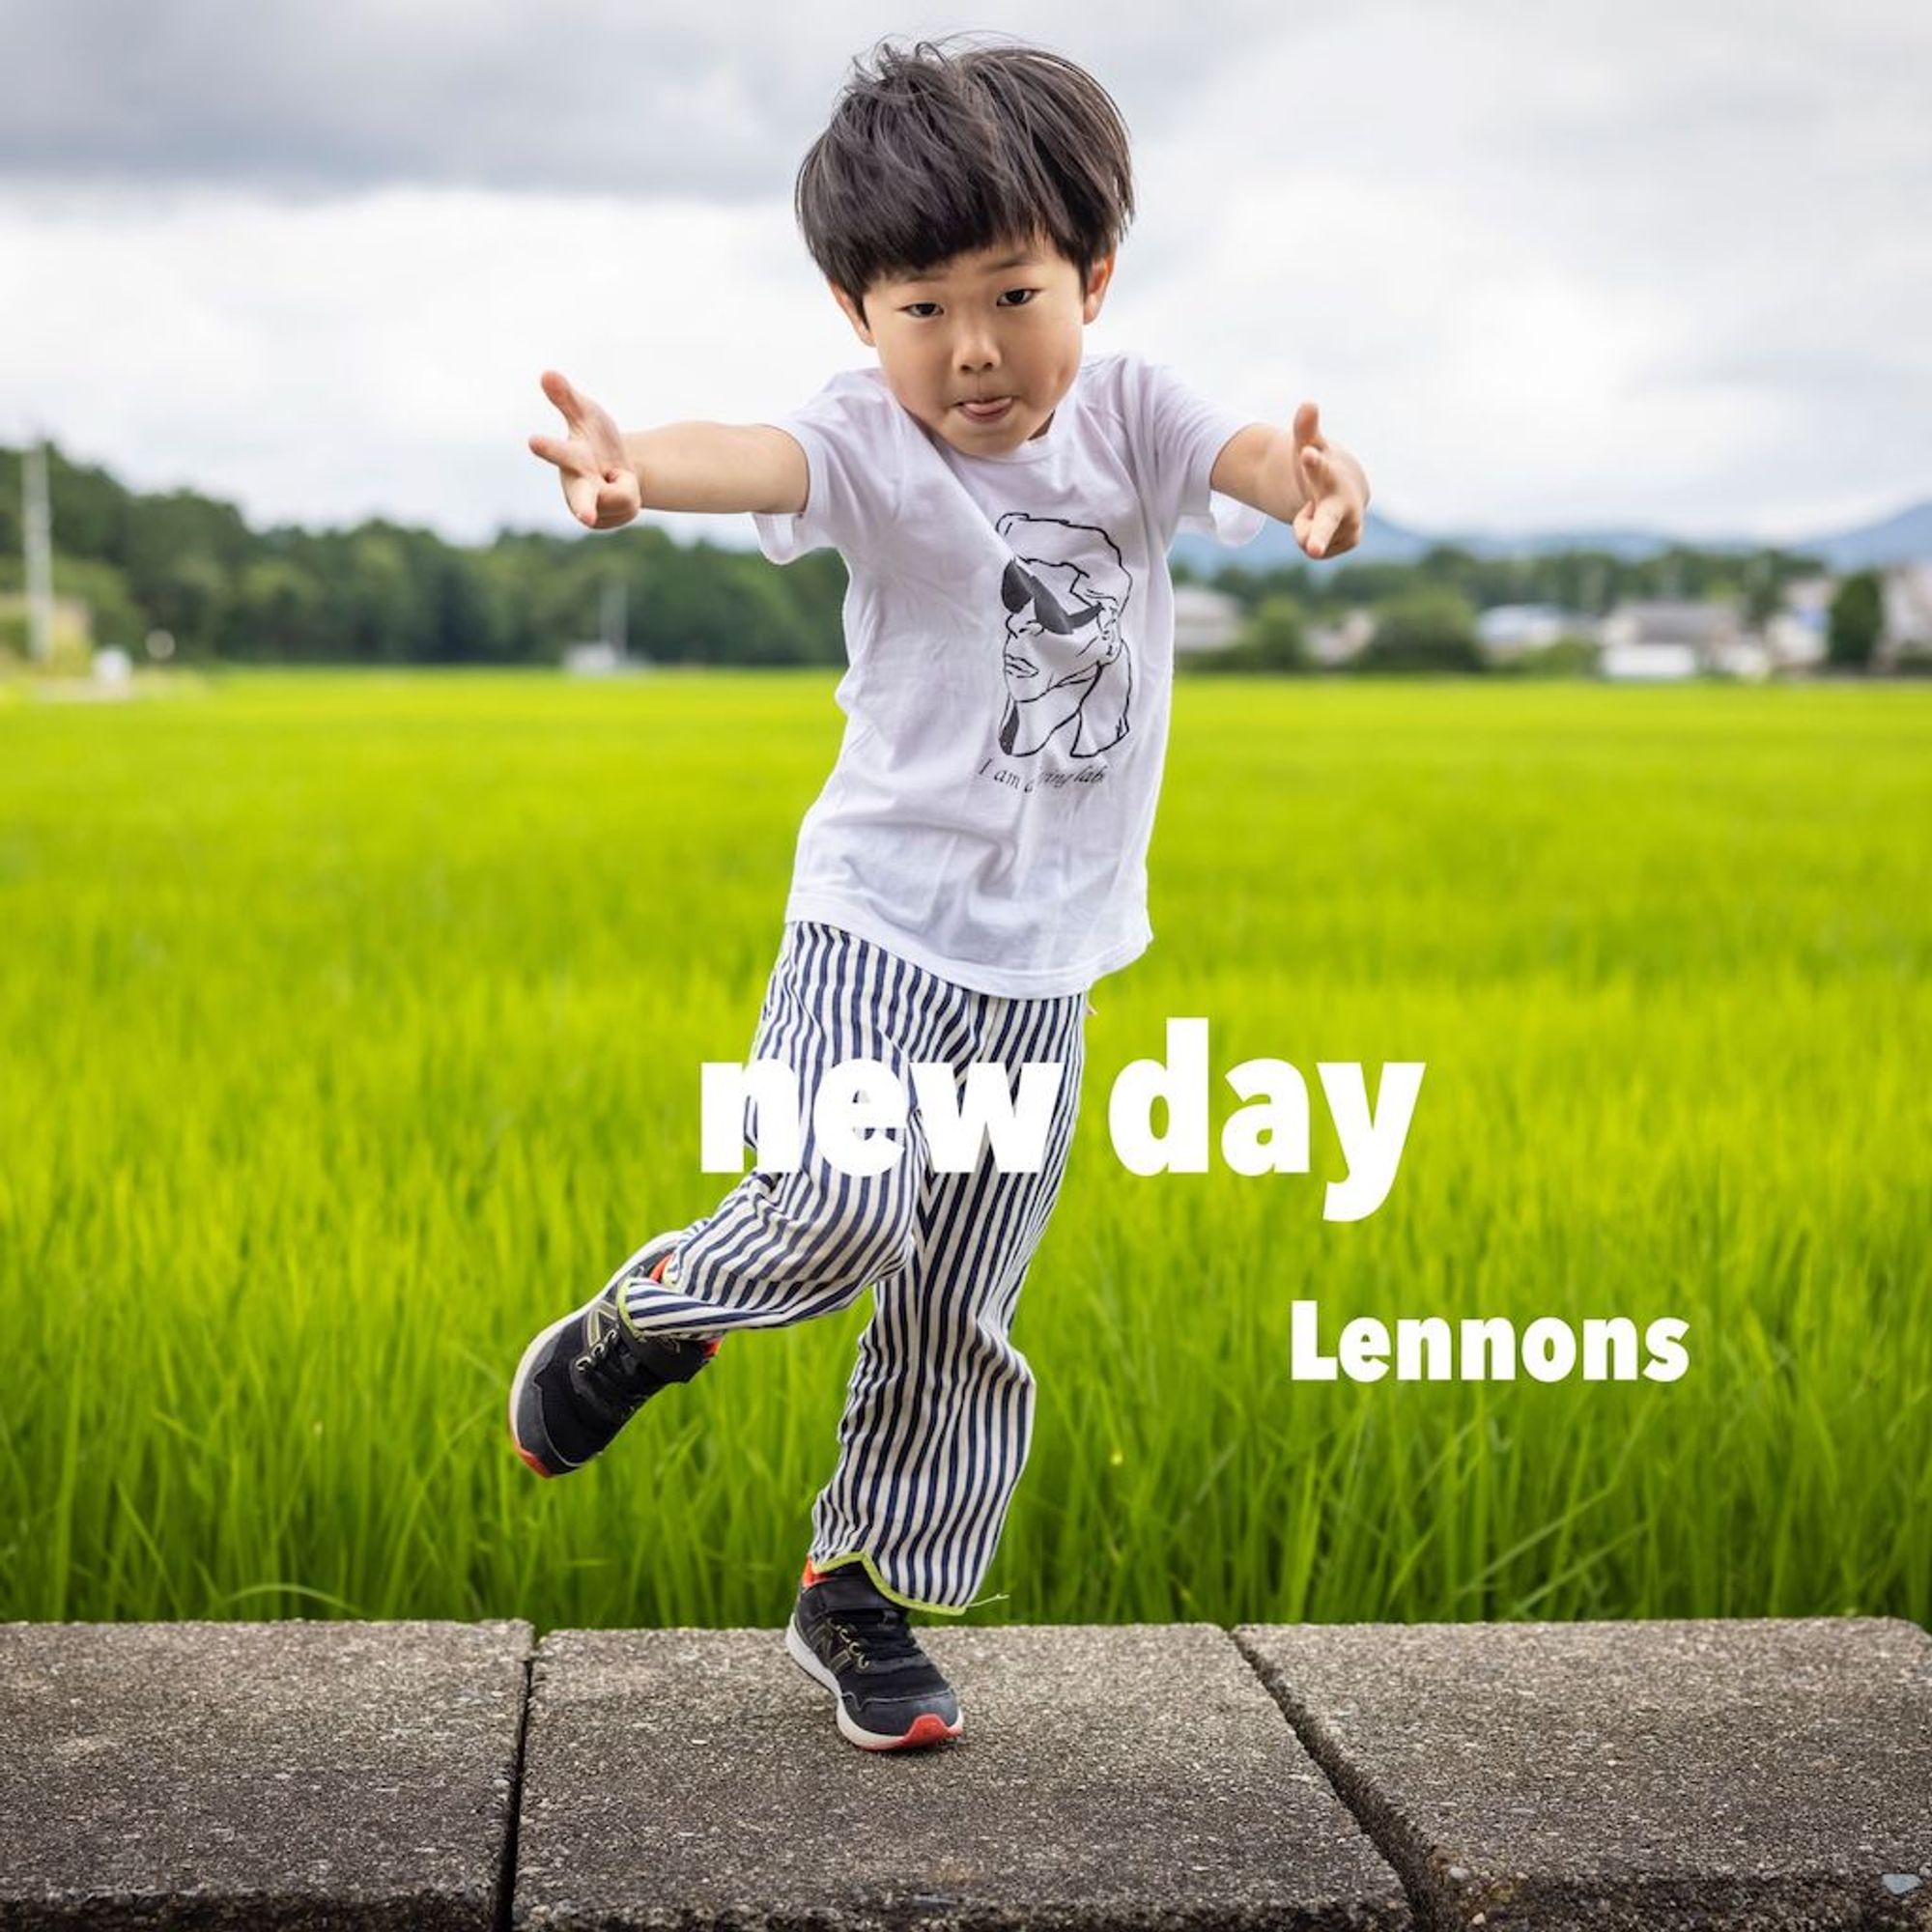 “new day” by Lennons